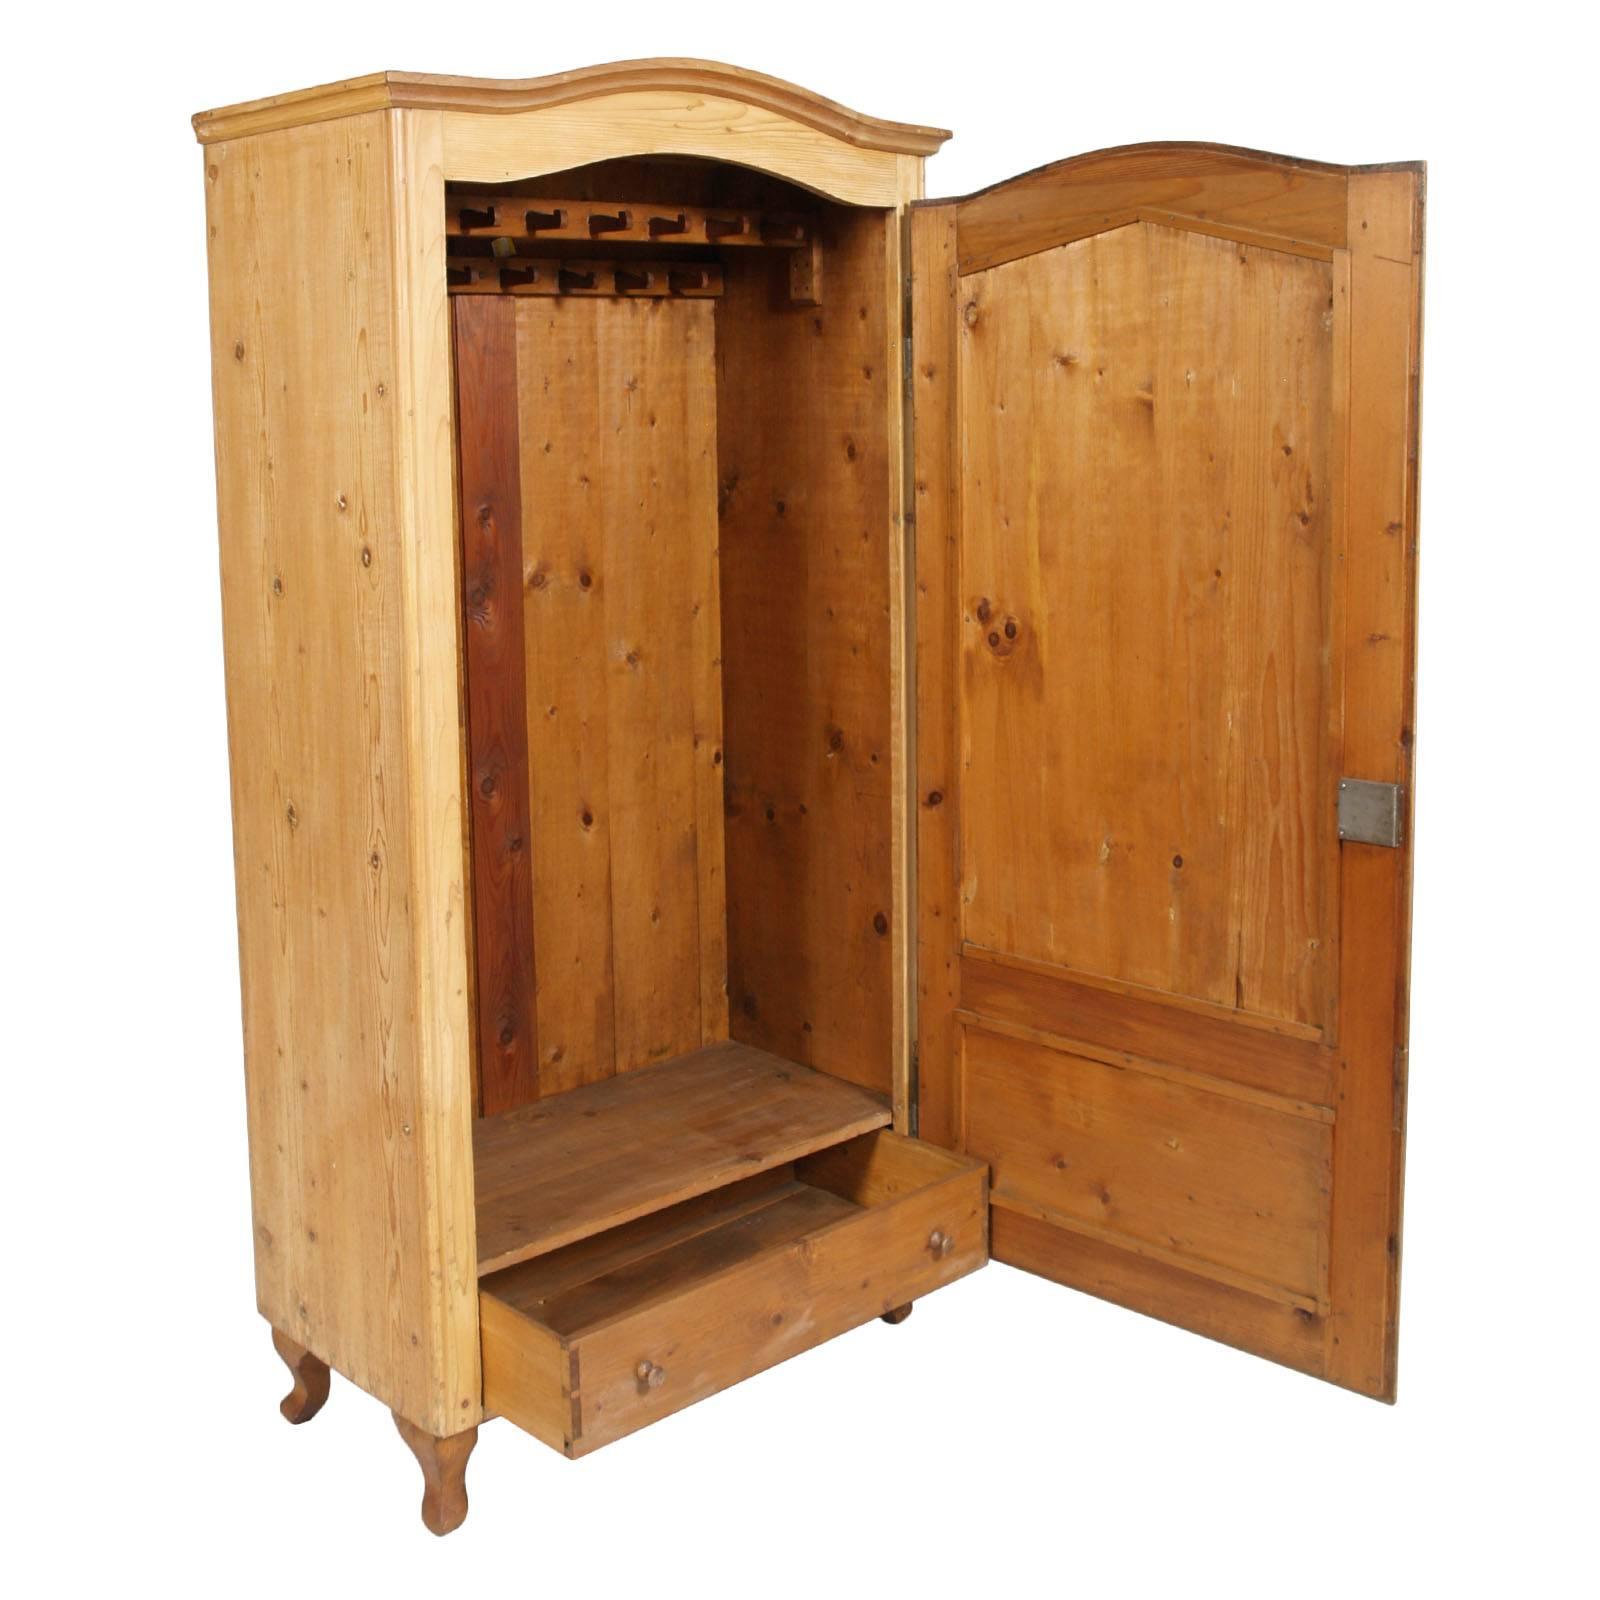 Late 18th century antique wardrobe armoire cupboard in solid wood. All in whitened solid larch the external part and walnut-colored internal parts and legs
The legs, are in walnut, all the other pieces in larch.
The aesthetic result is very